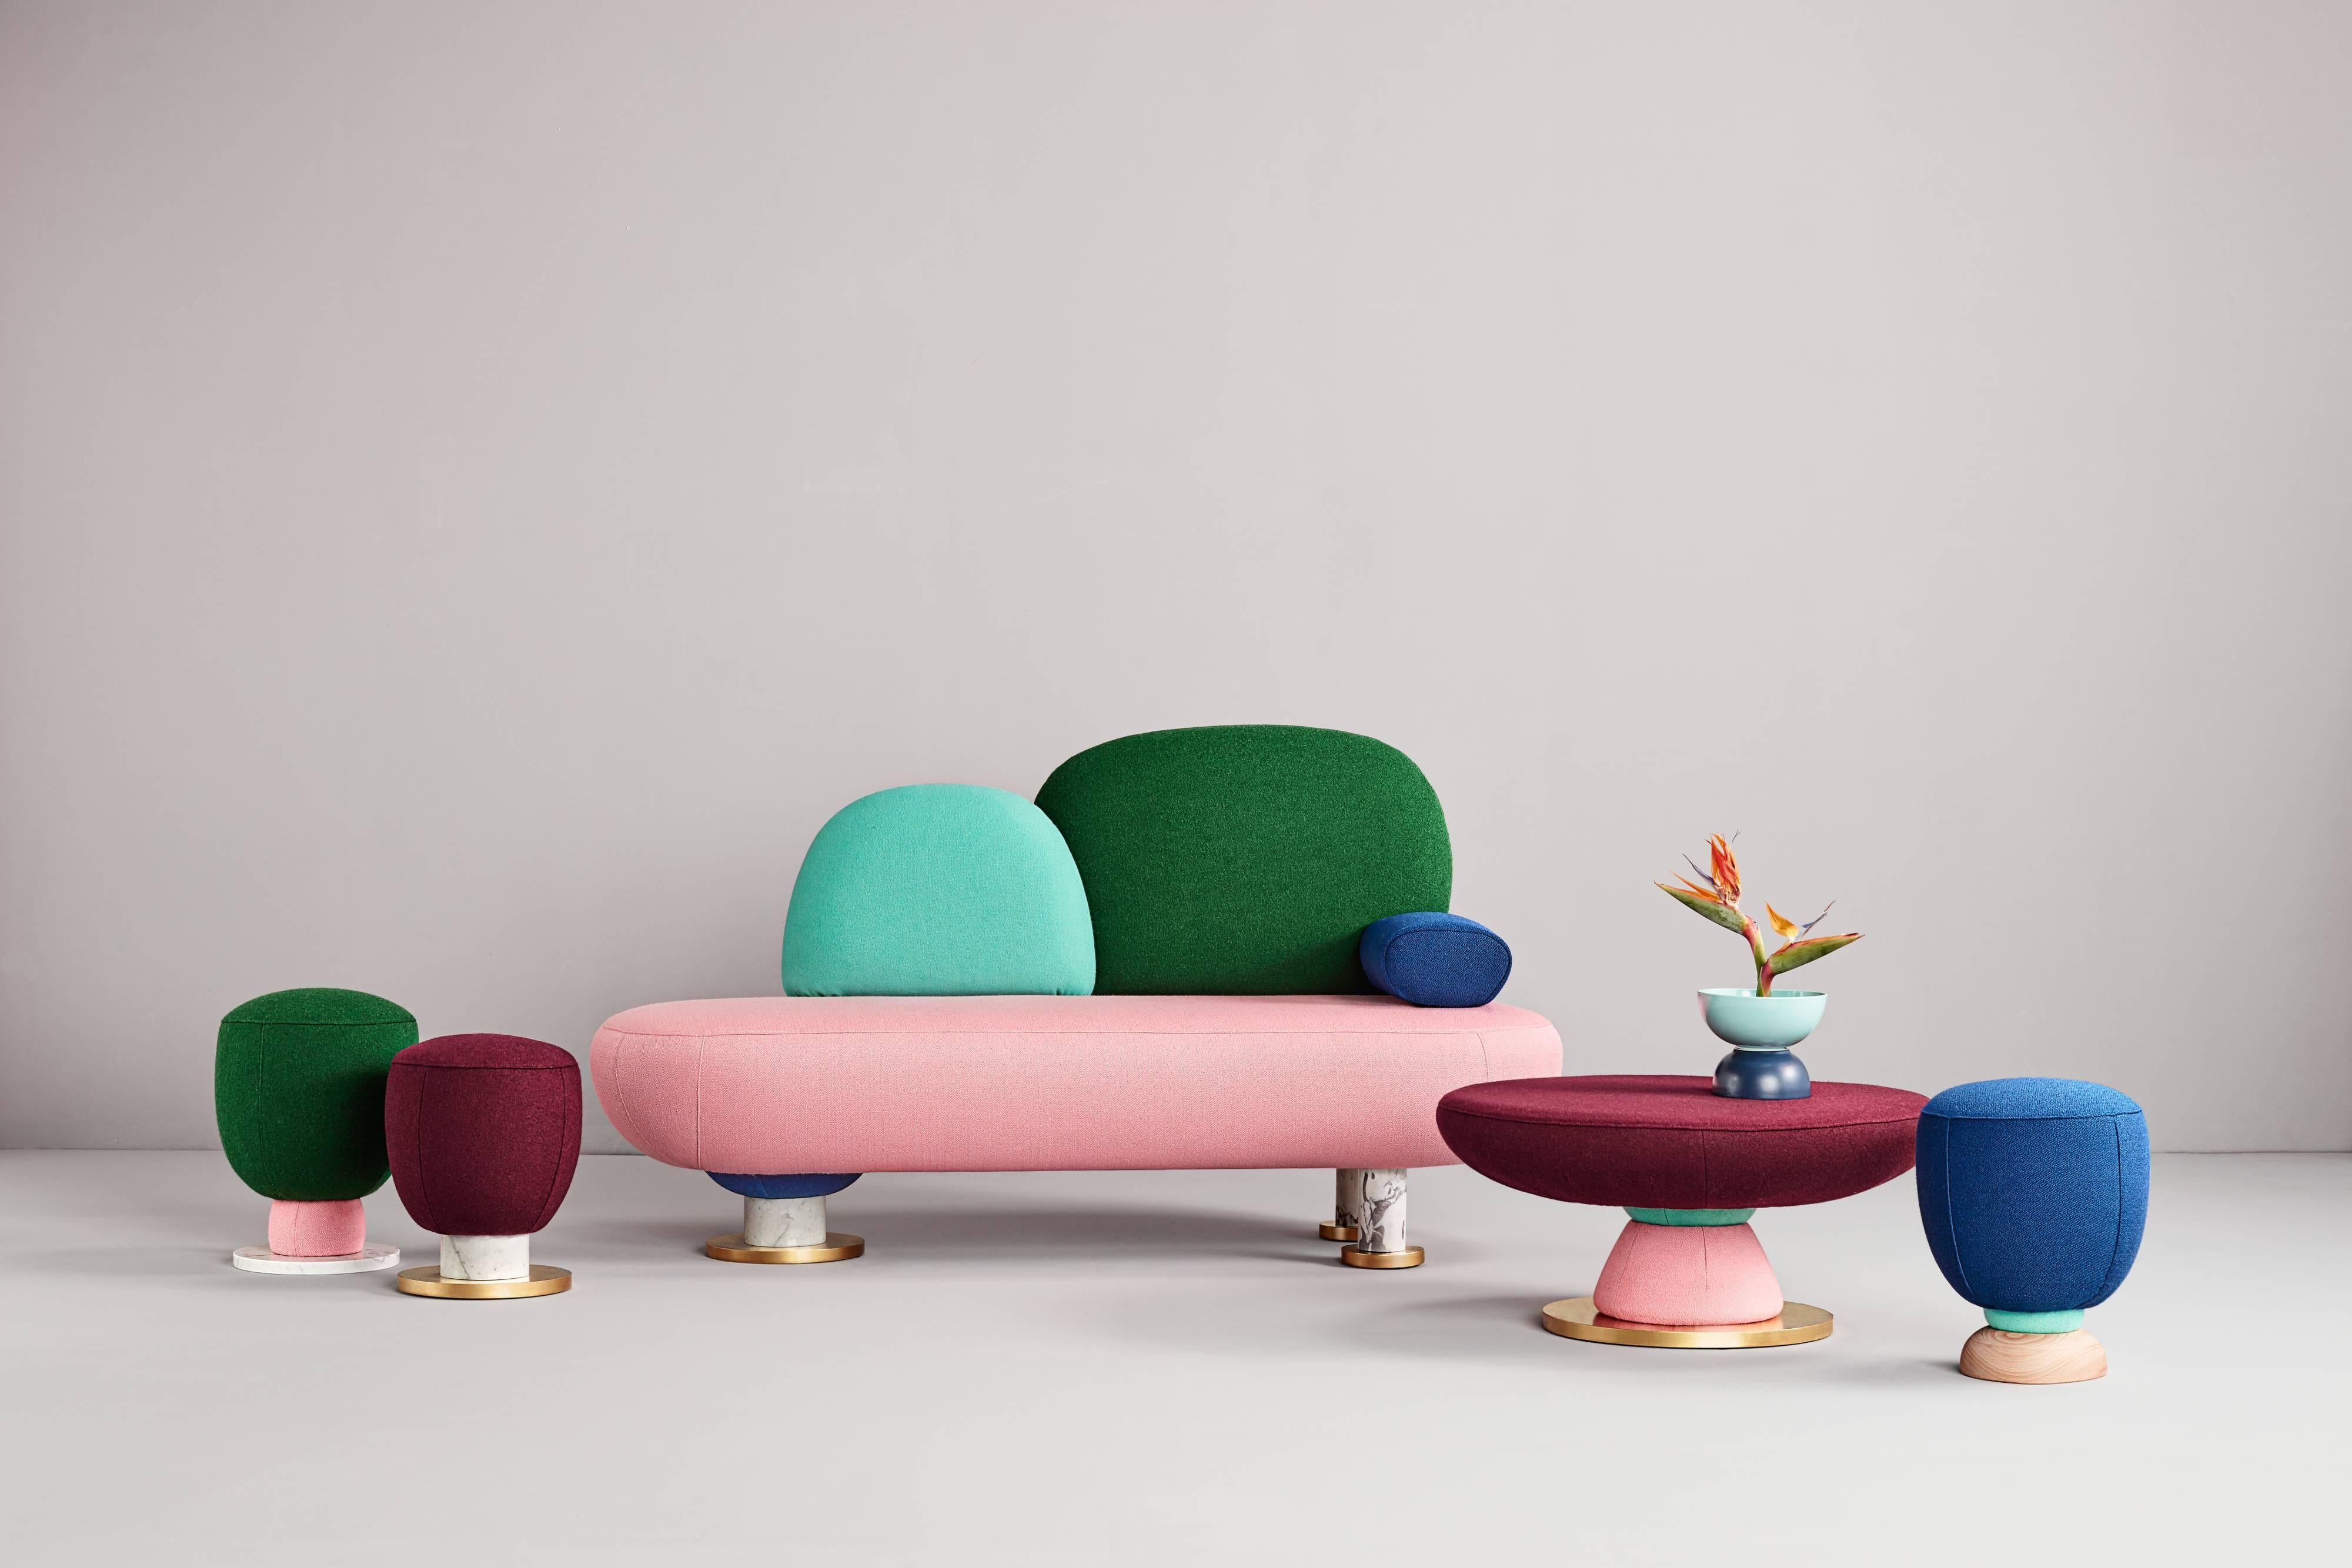 About 
Toadstool collection, colorful coffee table, Masquespacio

This collection of puffs, table and sofa bench designed by Masquespacio is inspired in the visual culture and graphic design always present one way
or another in the creative